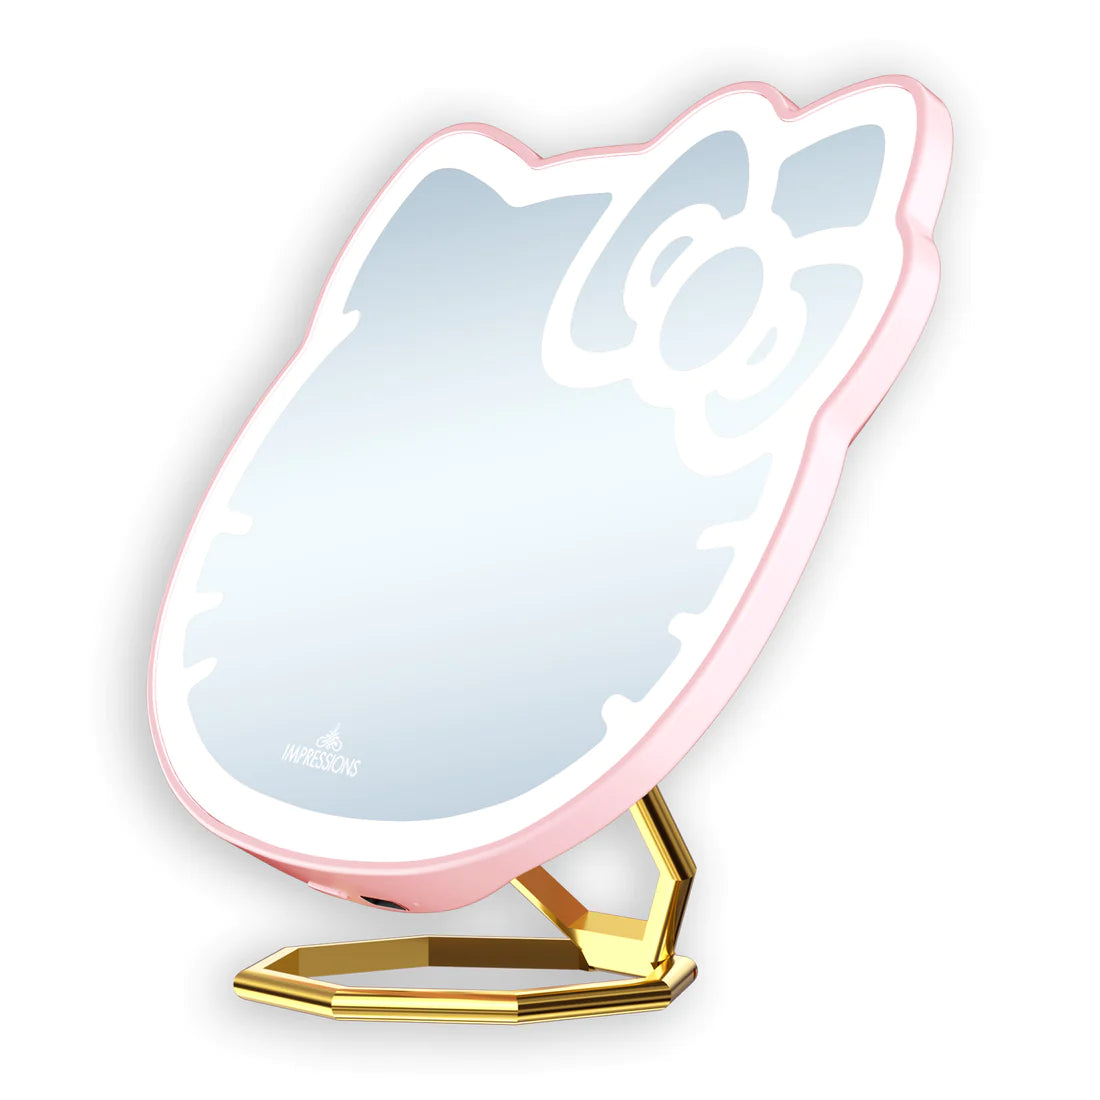 Impressions Vanity - Hello Kitty Pocket Mirror with Ring Stand Pink